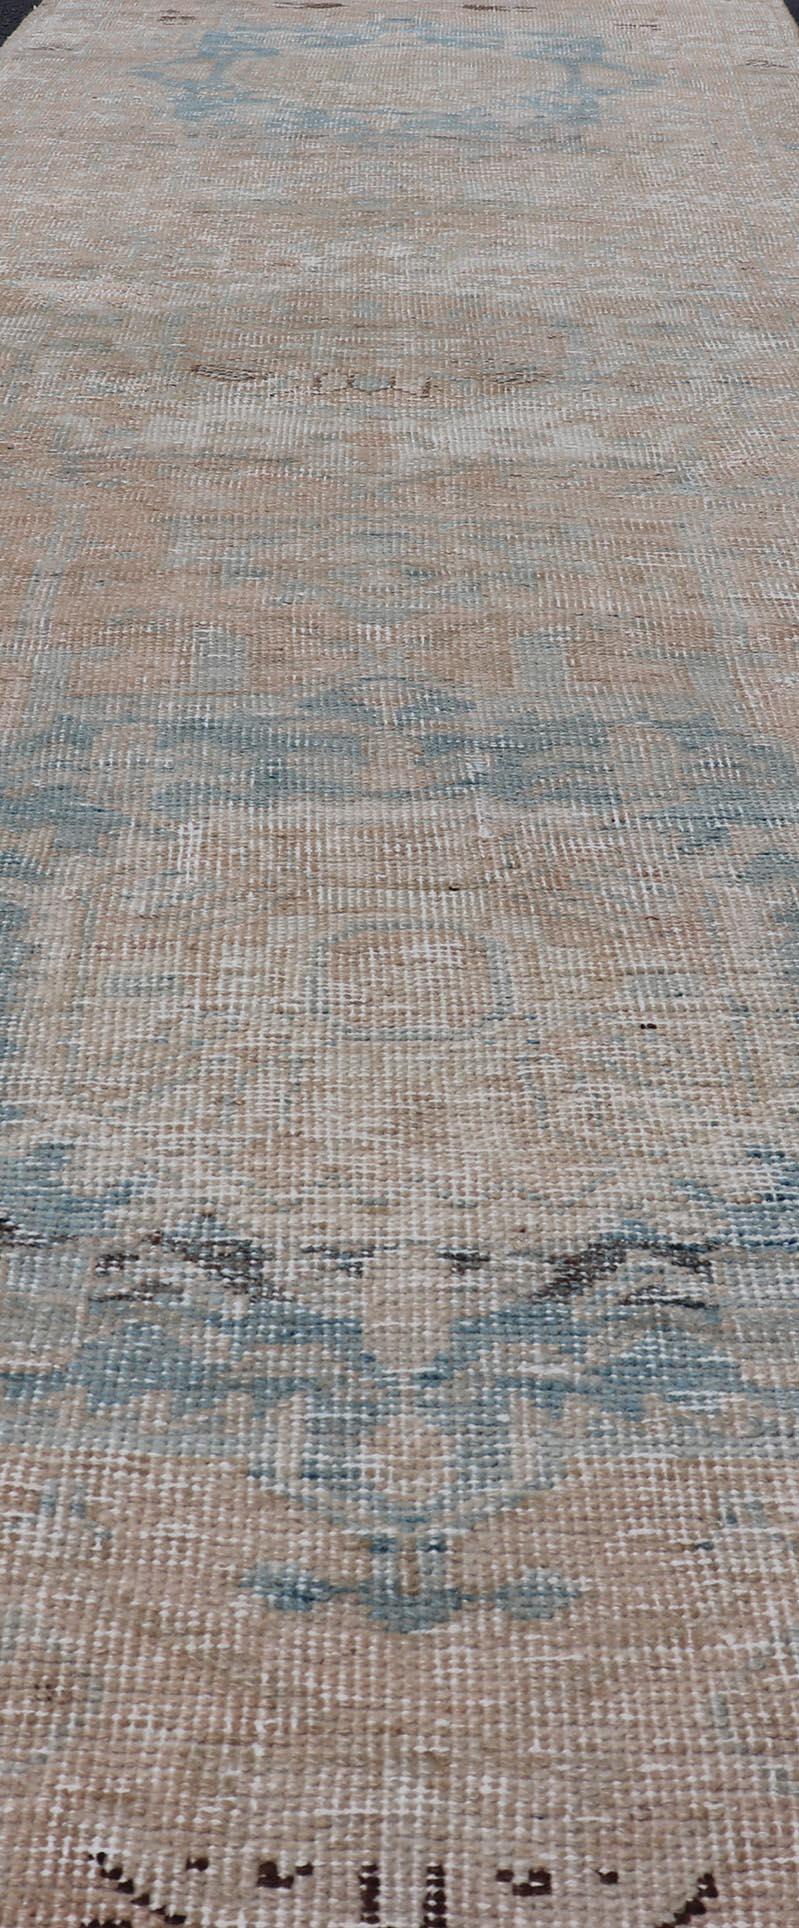 Vintage Persian Heriz Runner with Medallions in Earthy Tones and Light Blue For Sale 5